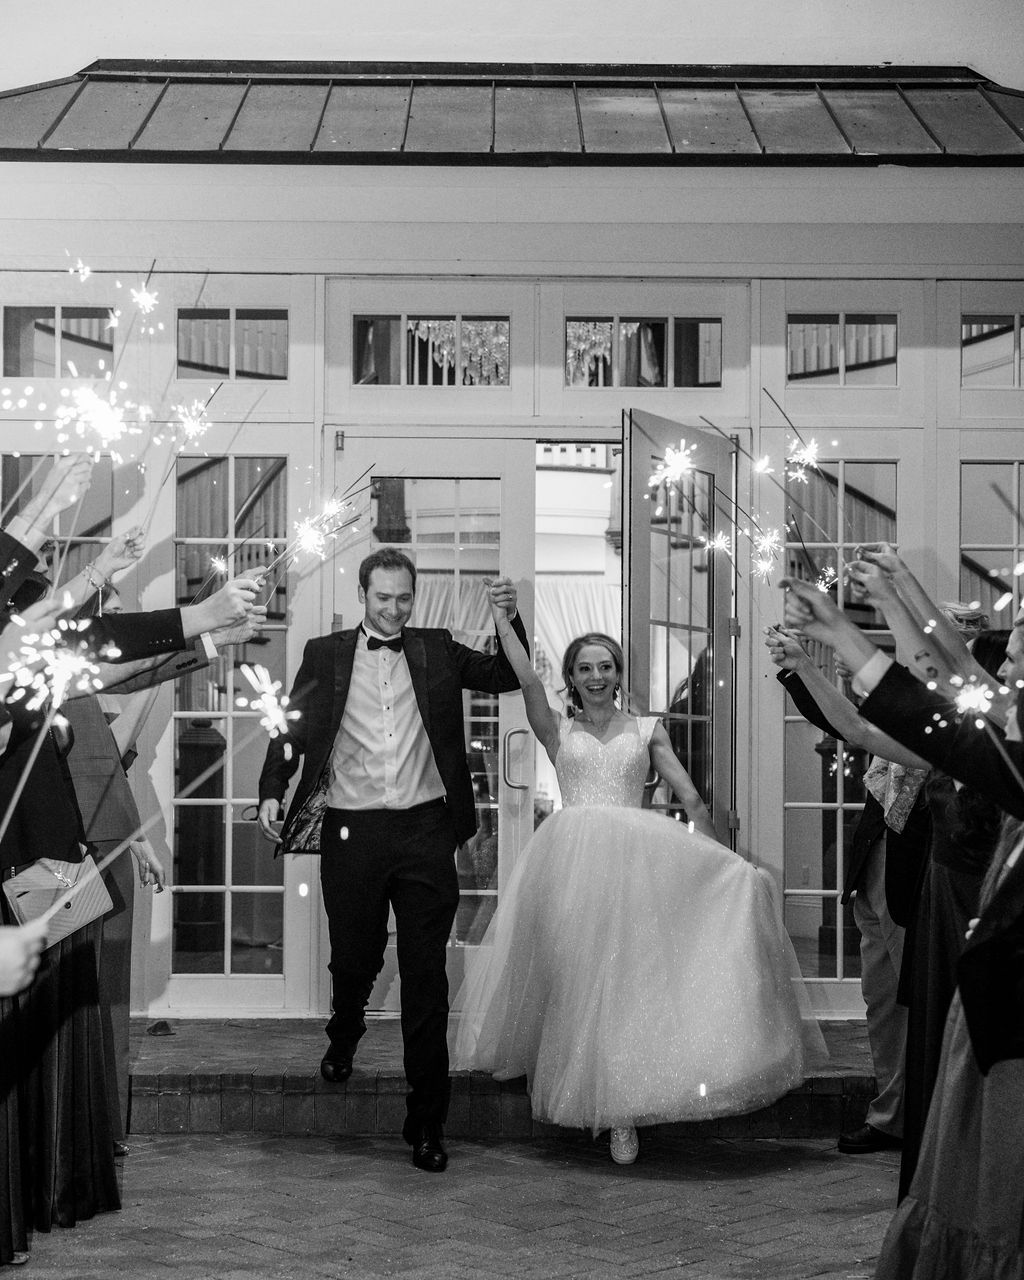 Emily and Robert's sparkler exit at their wedding